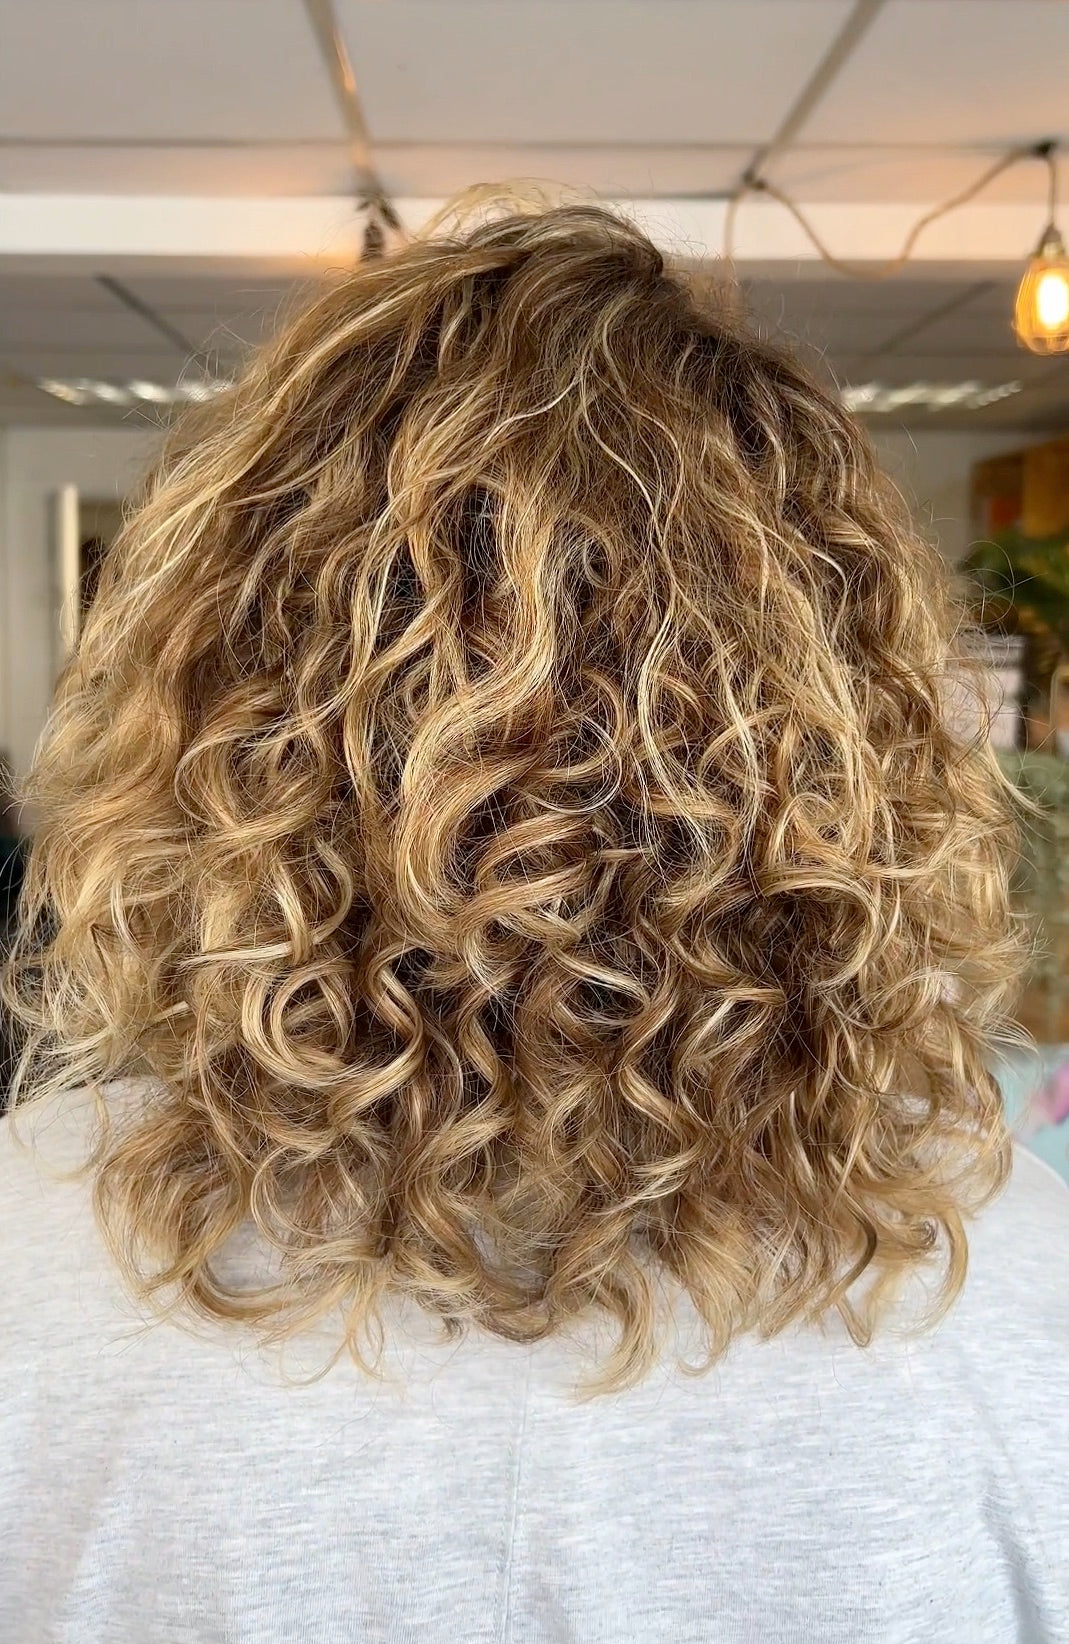 How To Get More Volume In Your Curls